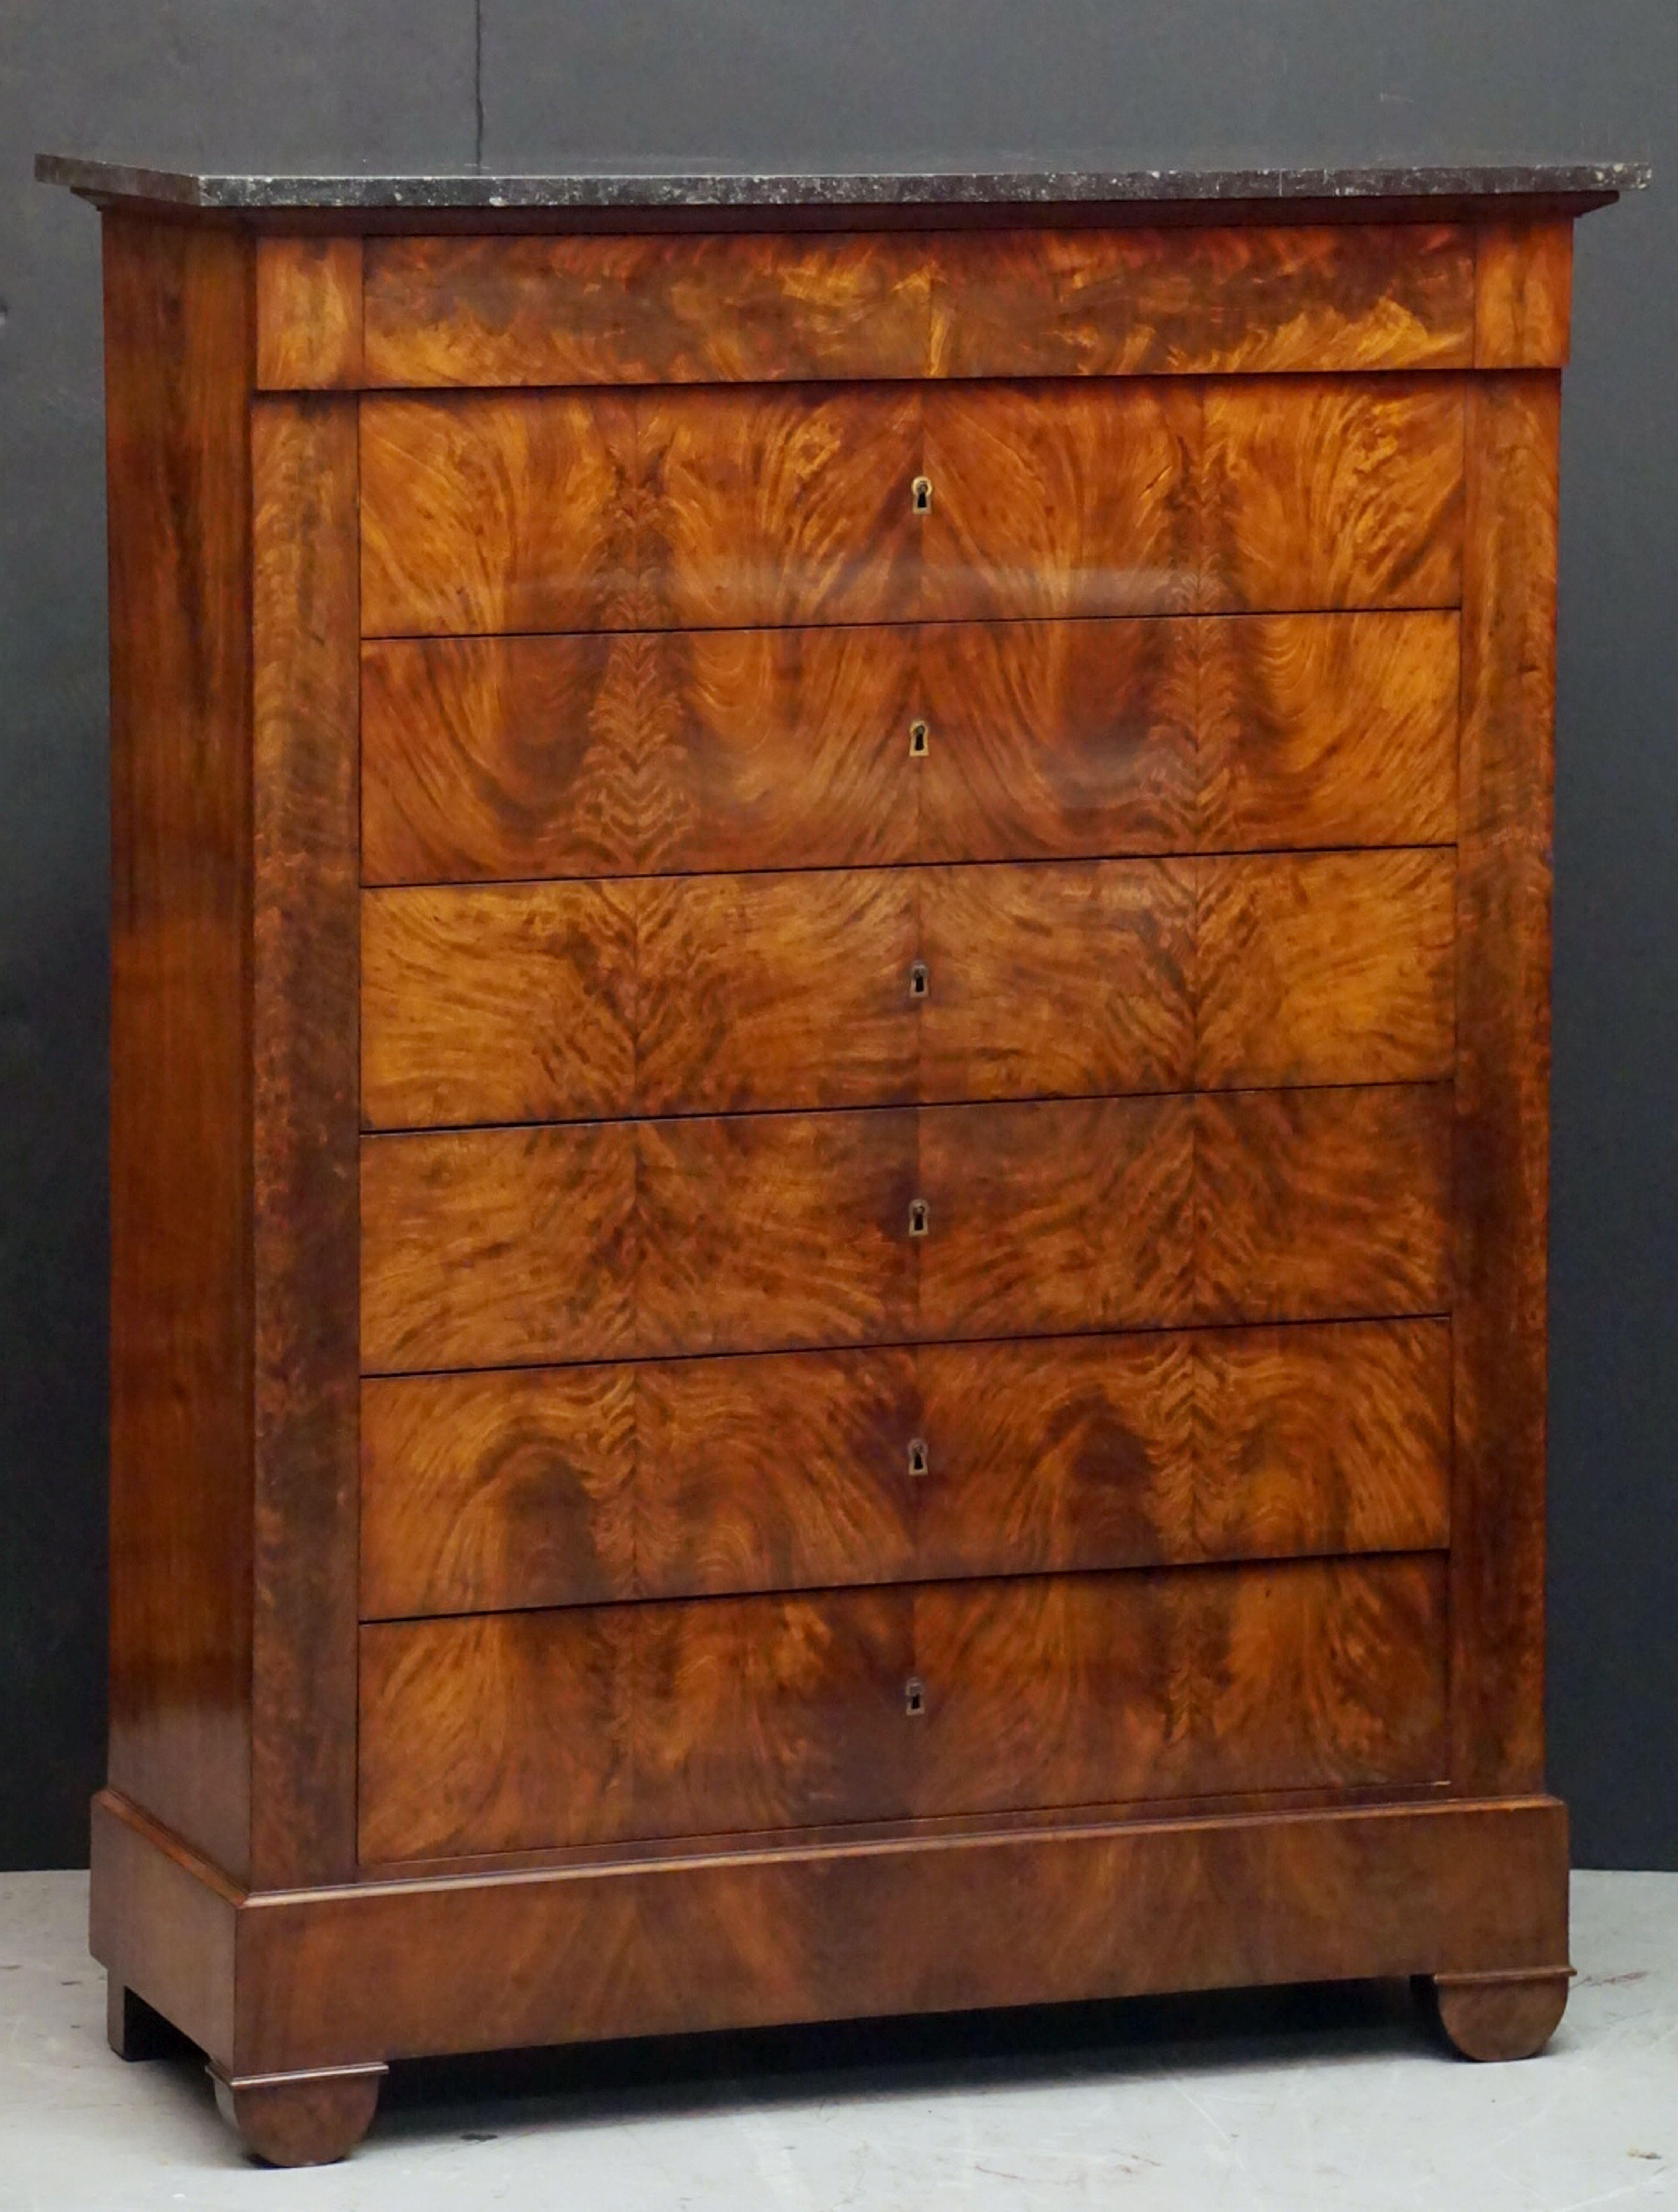 A handsome French semainier or tall chest of mahogany with marble top, featuring a slightly narrower top drawer over six larger drawers beneath.
The drawer fronts with flame-cut veneers. The six larger drawers have escutcheons and individual keys